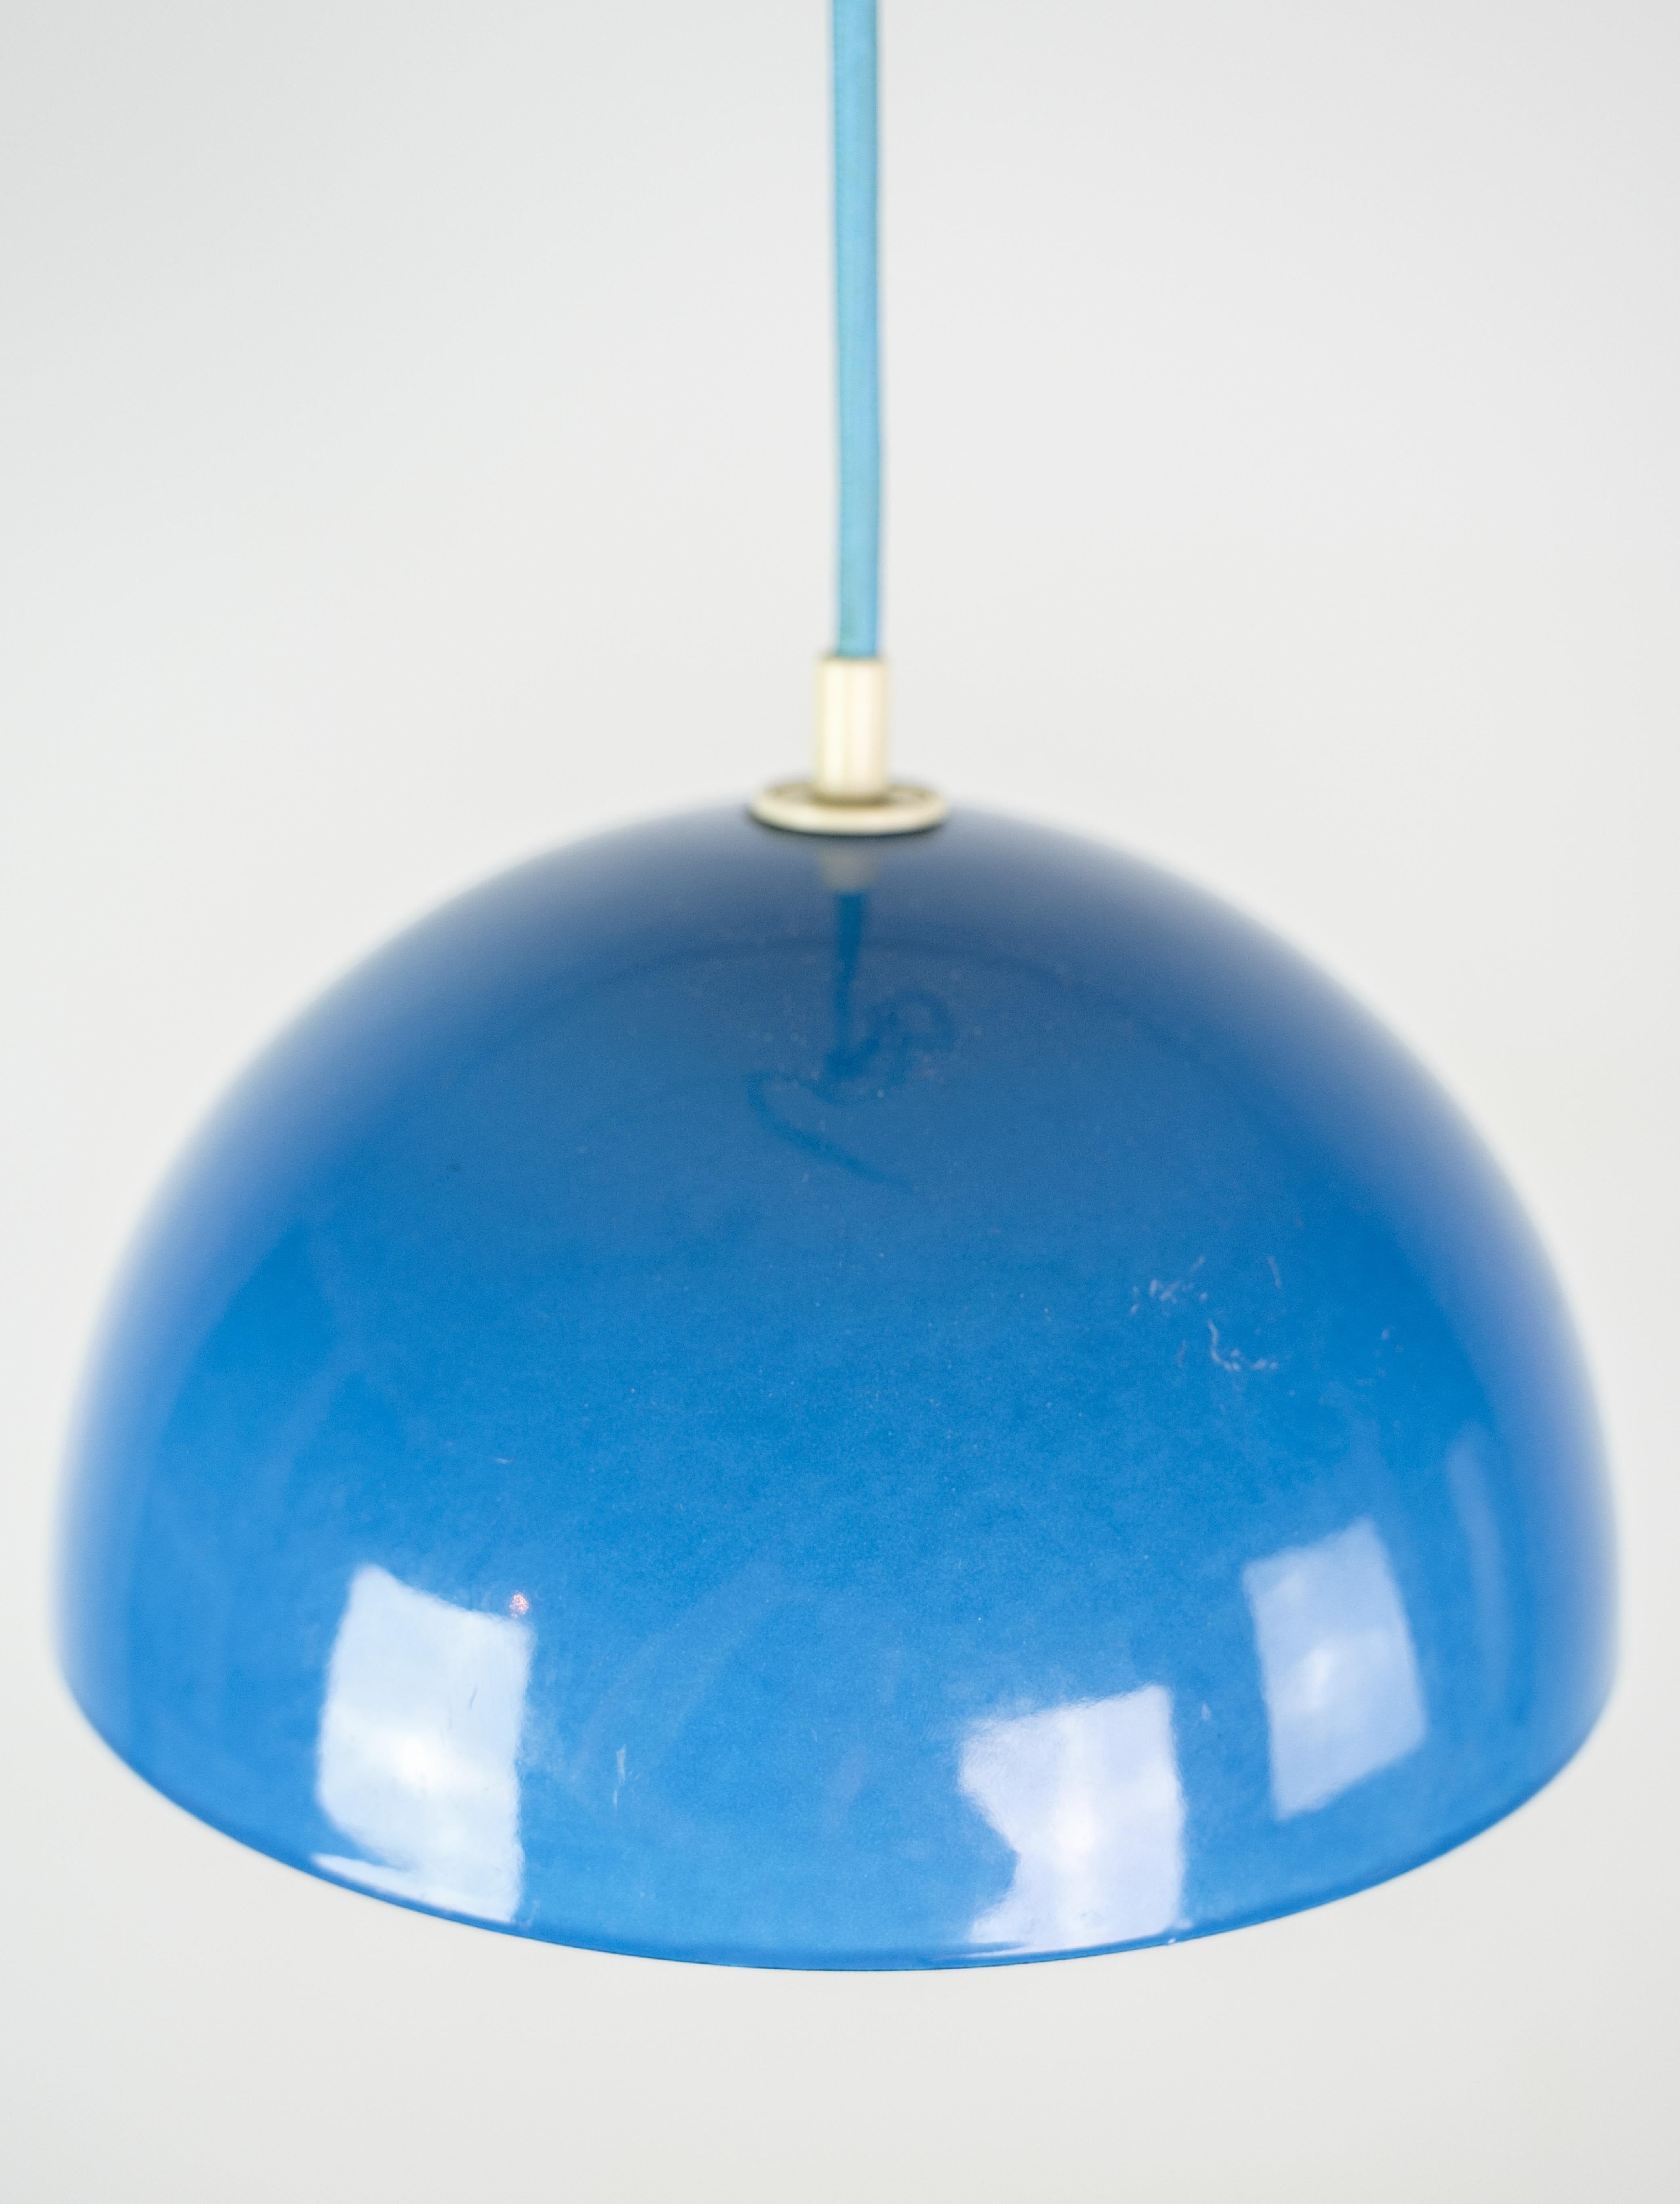 Flowerpot ceiling lamp, designed by Verner Panton (1926-1998) VP1 in light blue color from the 1970s.
Dimensions in cm: height:15 diameter: 21.